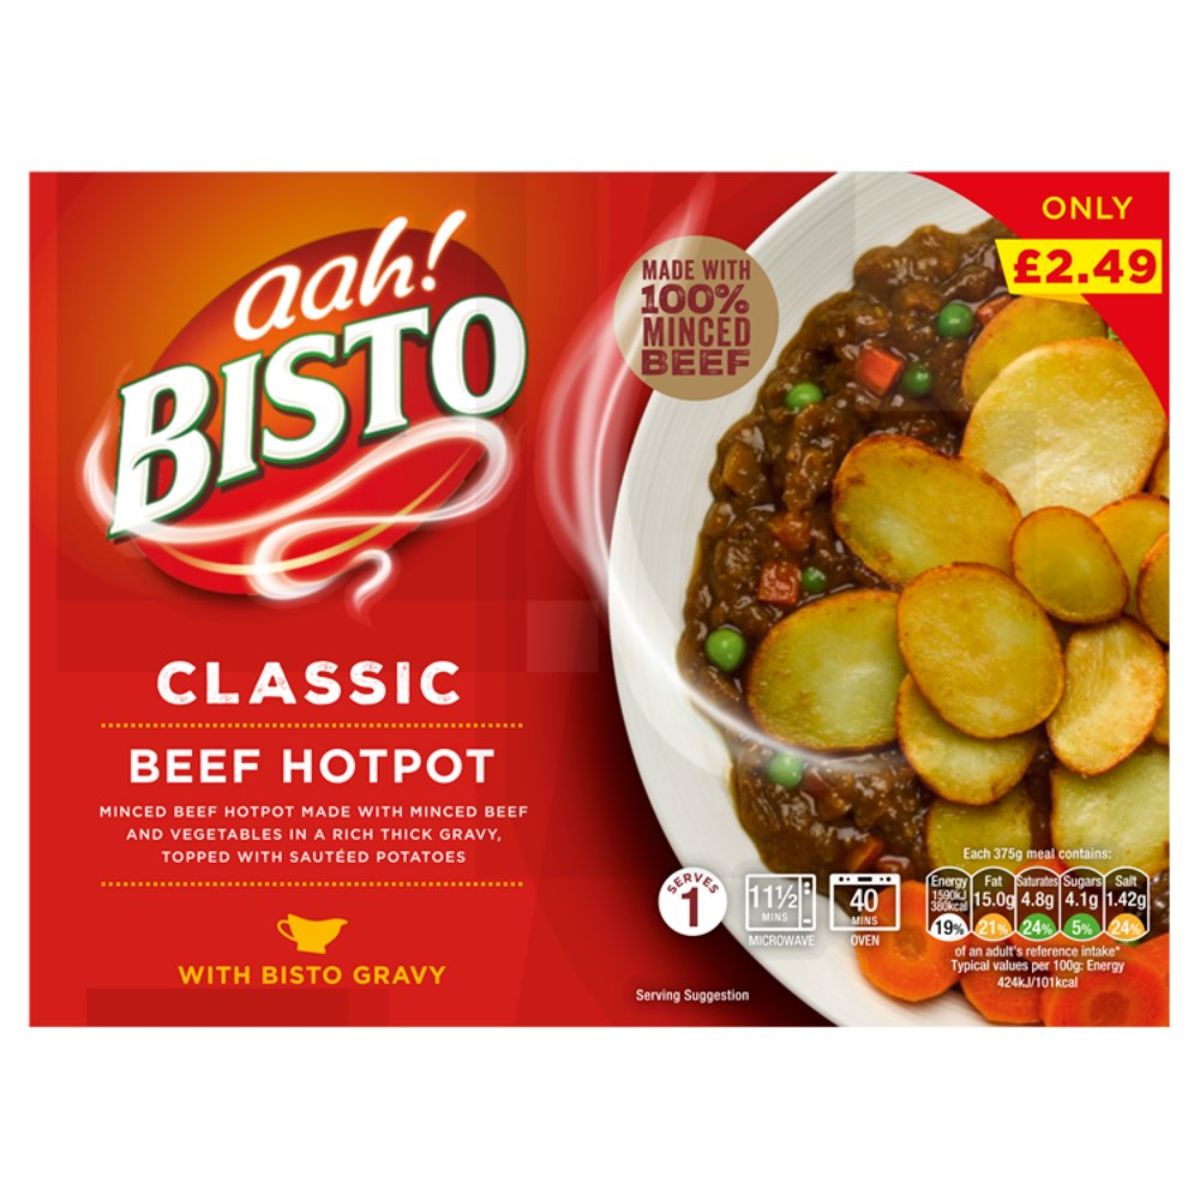 A box of Bisto - Classic Beef Hotpot - 375g.